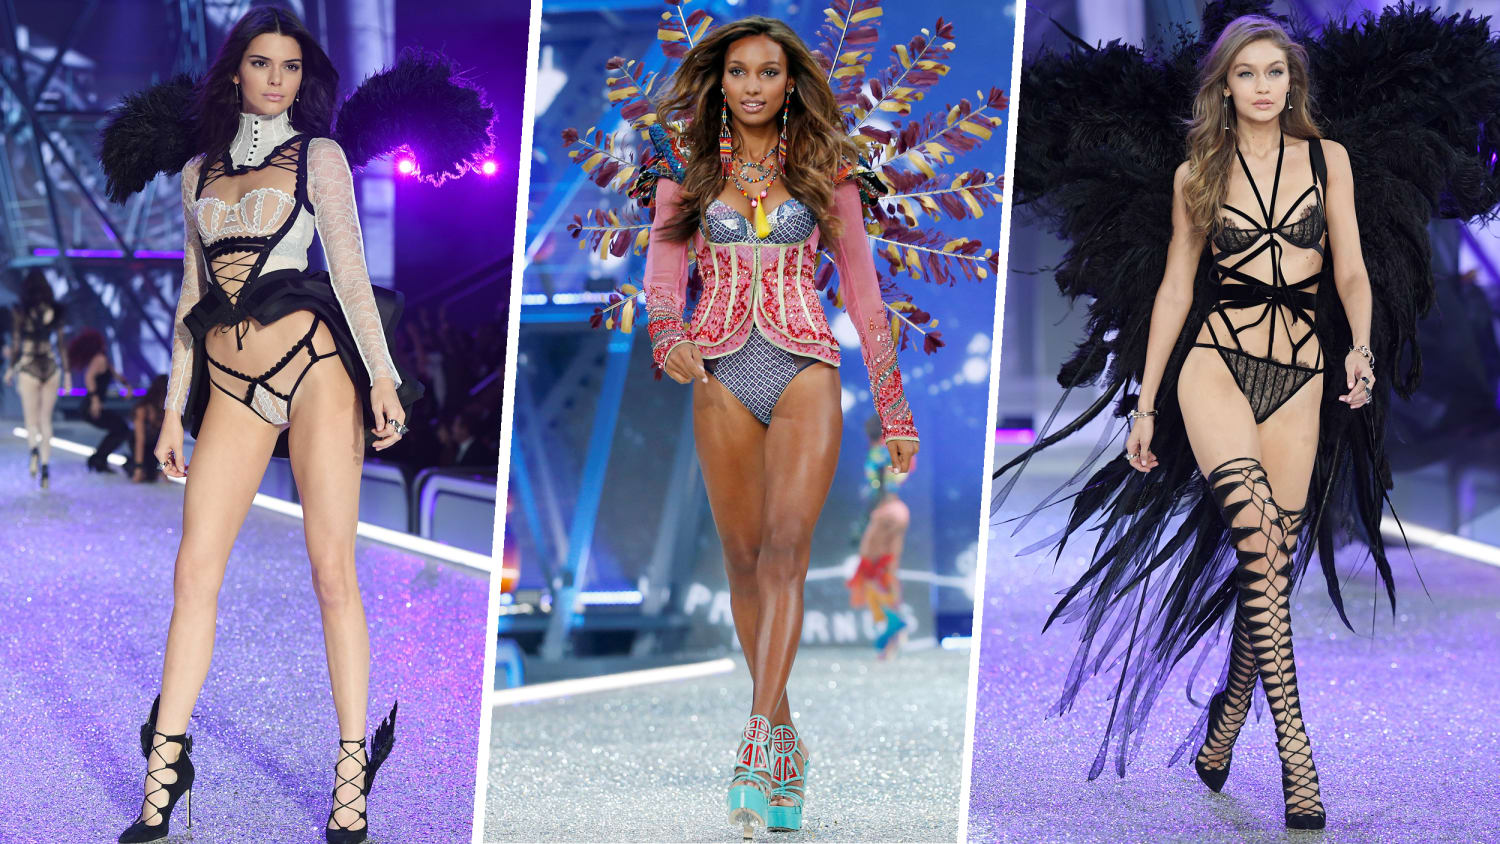 Here's A First Look At The 2016 Victoria's Secret Fashion Show In Paris